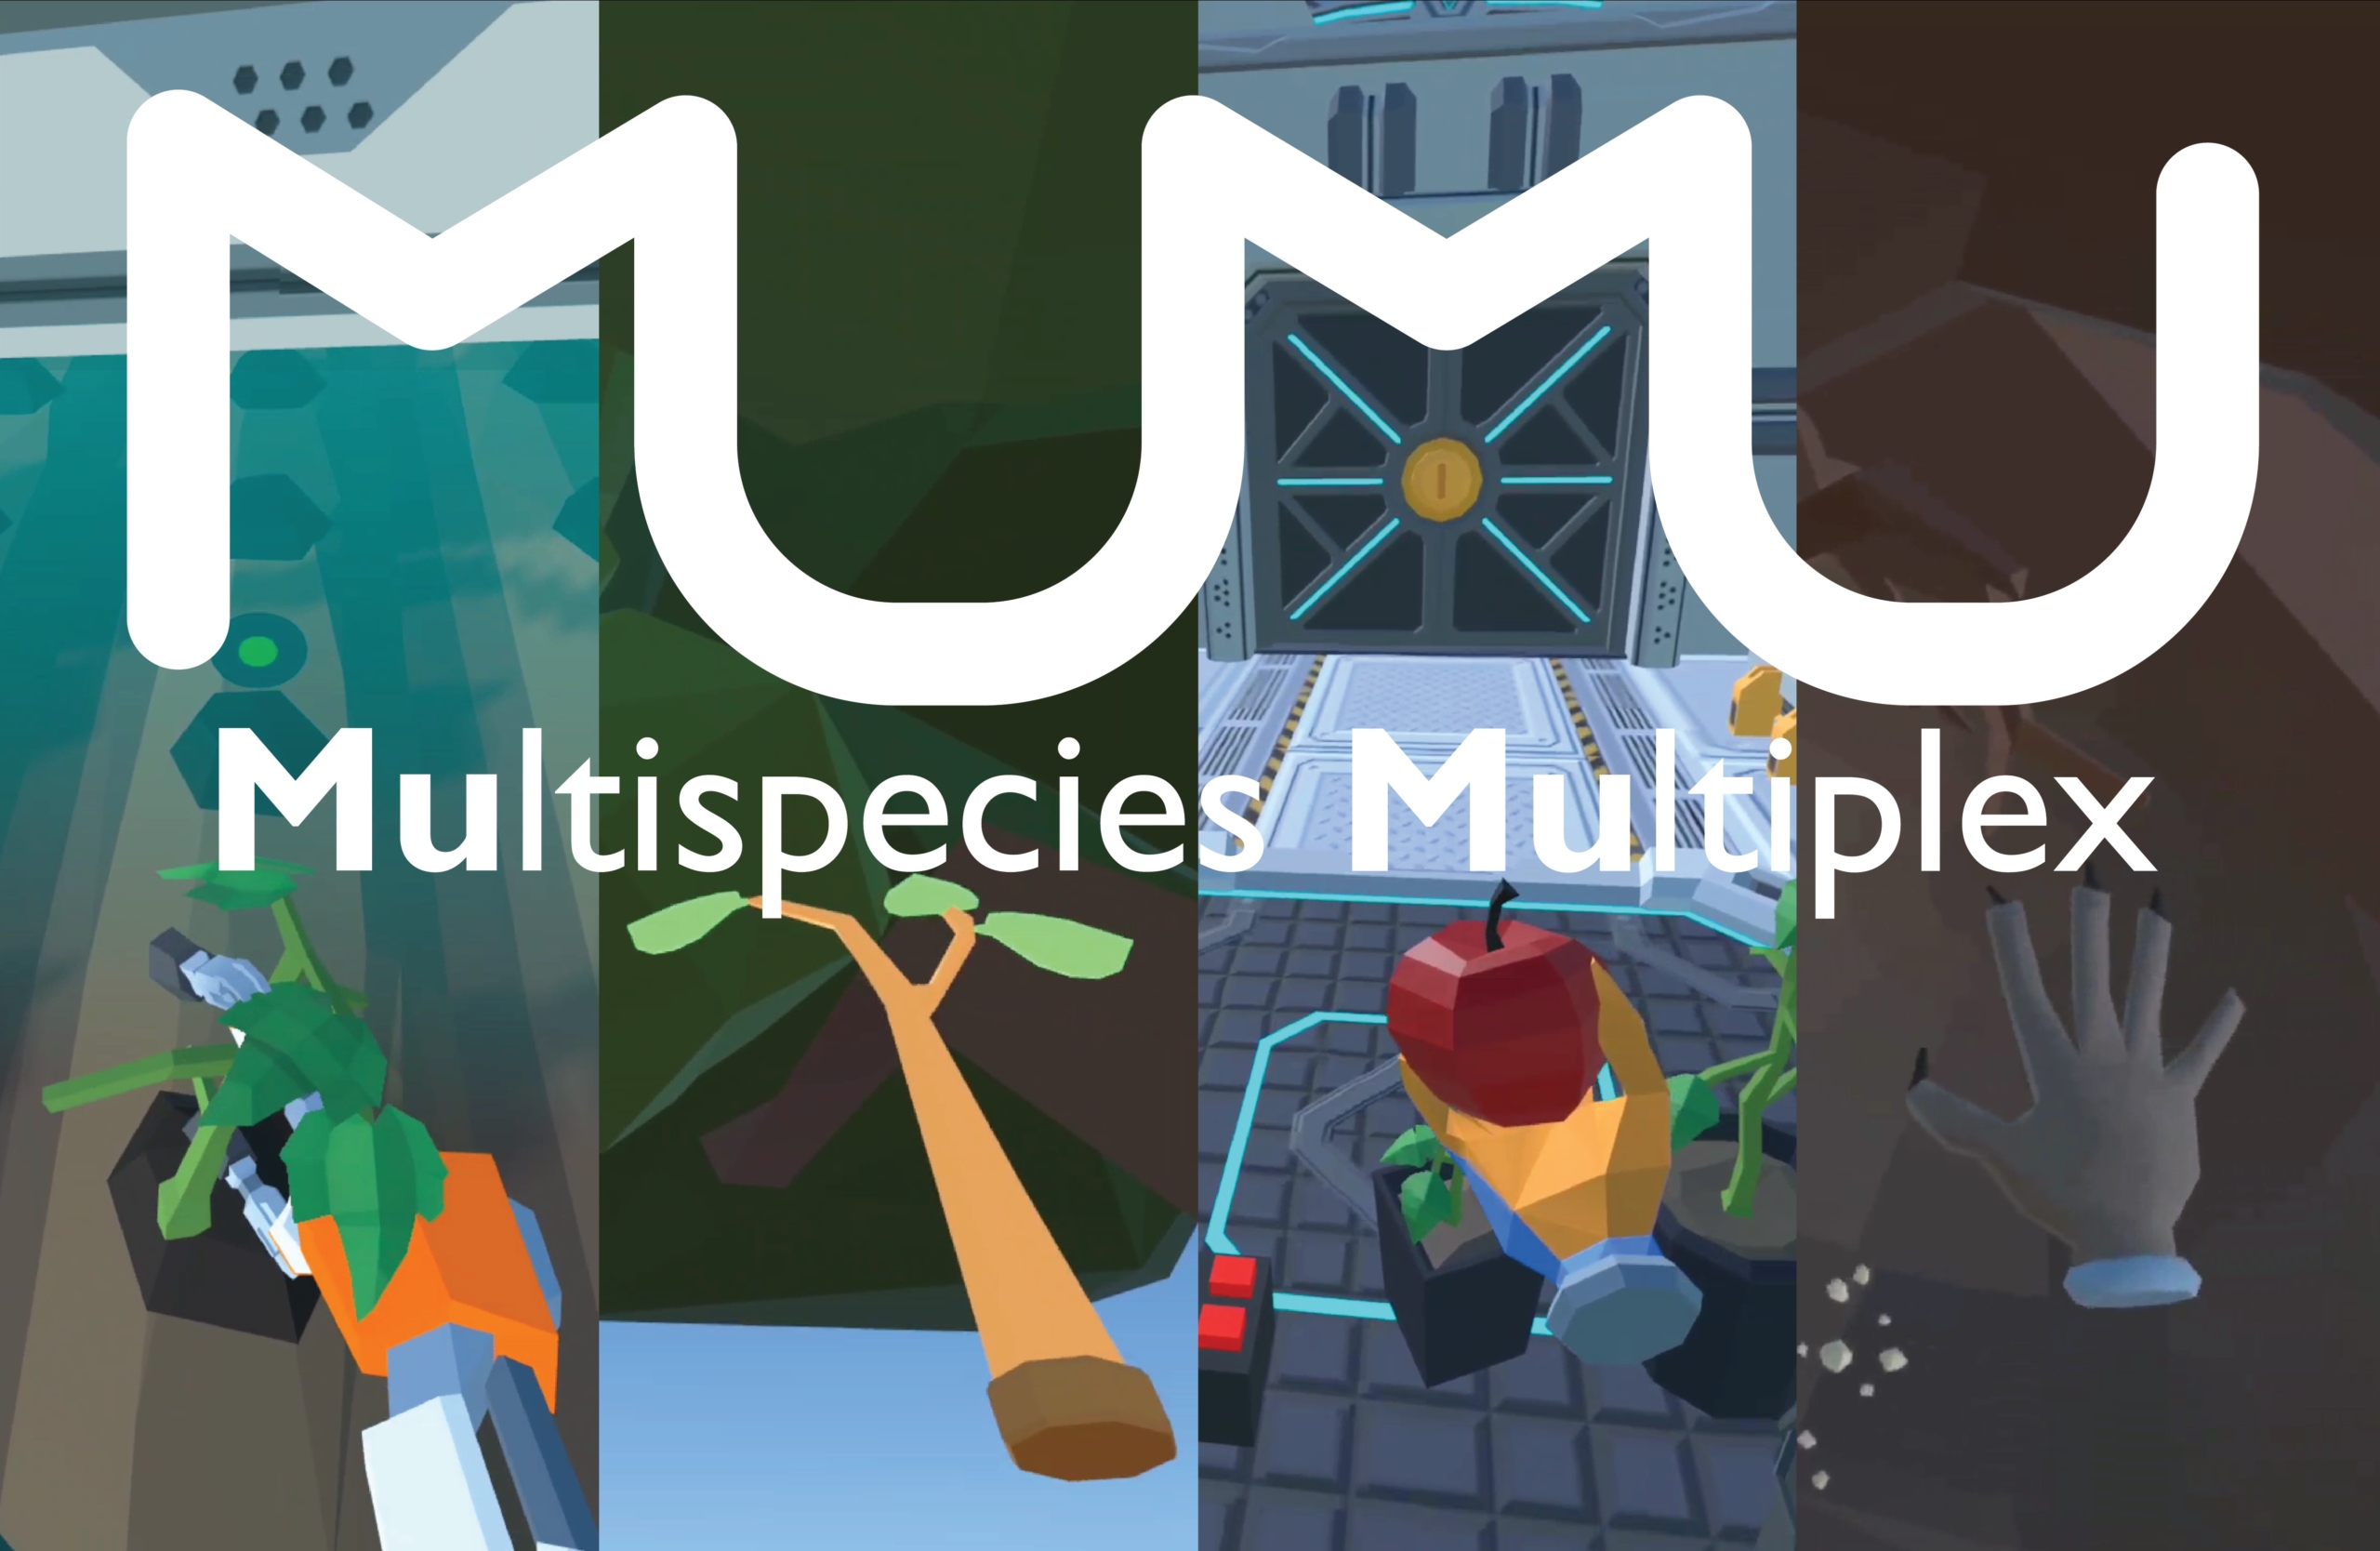 Four different vertical panels with "MUMU: Multispecies Multiplex" in large white text over the images. Each panel shows a limb reaching forward from the perspective of the owner of the limb. The leftmost panel shows an orange robot hand holding a green leafy plant against a background of a tilled dirt field. The panel second from left depicts a tree branch reaching up toward the sky, with more tree leaves in the background. The panel third from left shows a gloved farmer hand holding an apple in a futuristic farm laboratory. The rightmost panel shows a prairie dog paw reaching to dig into a dirt tunnel.